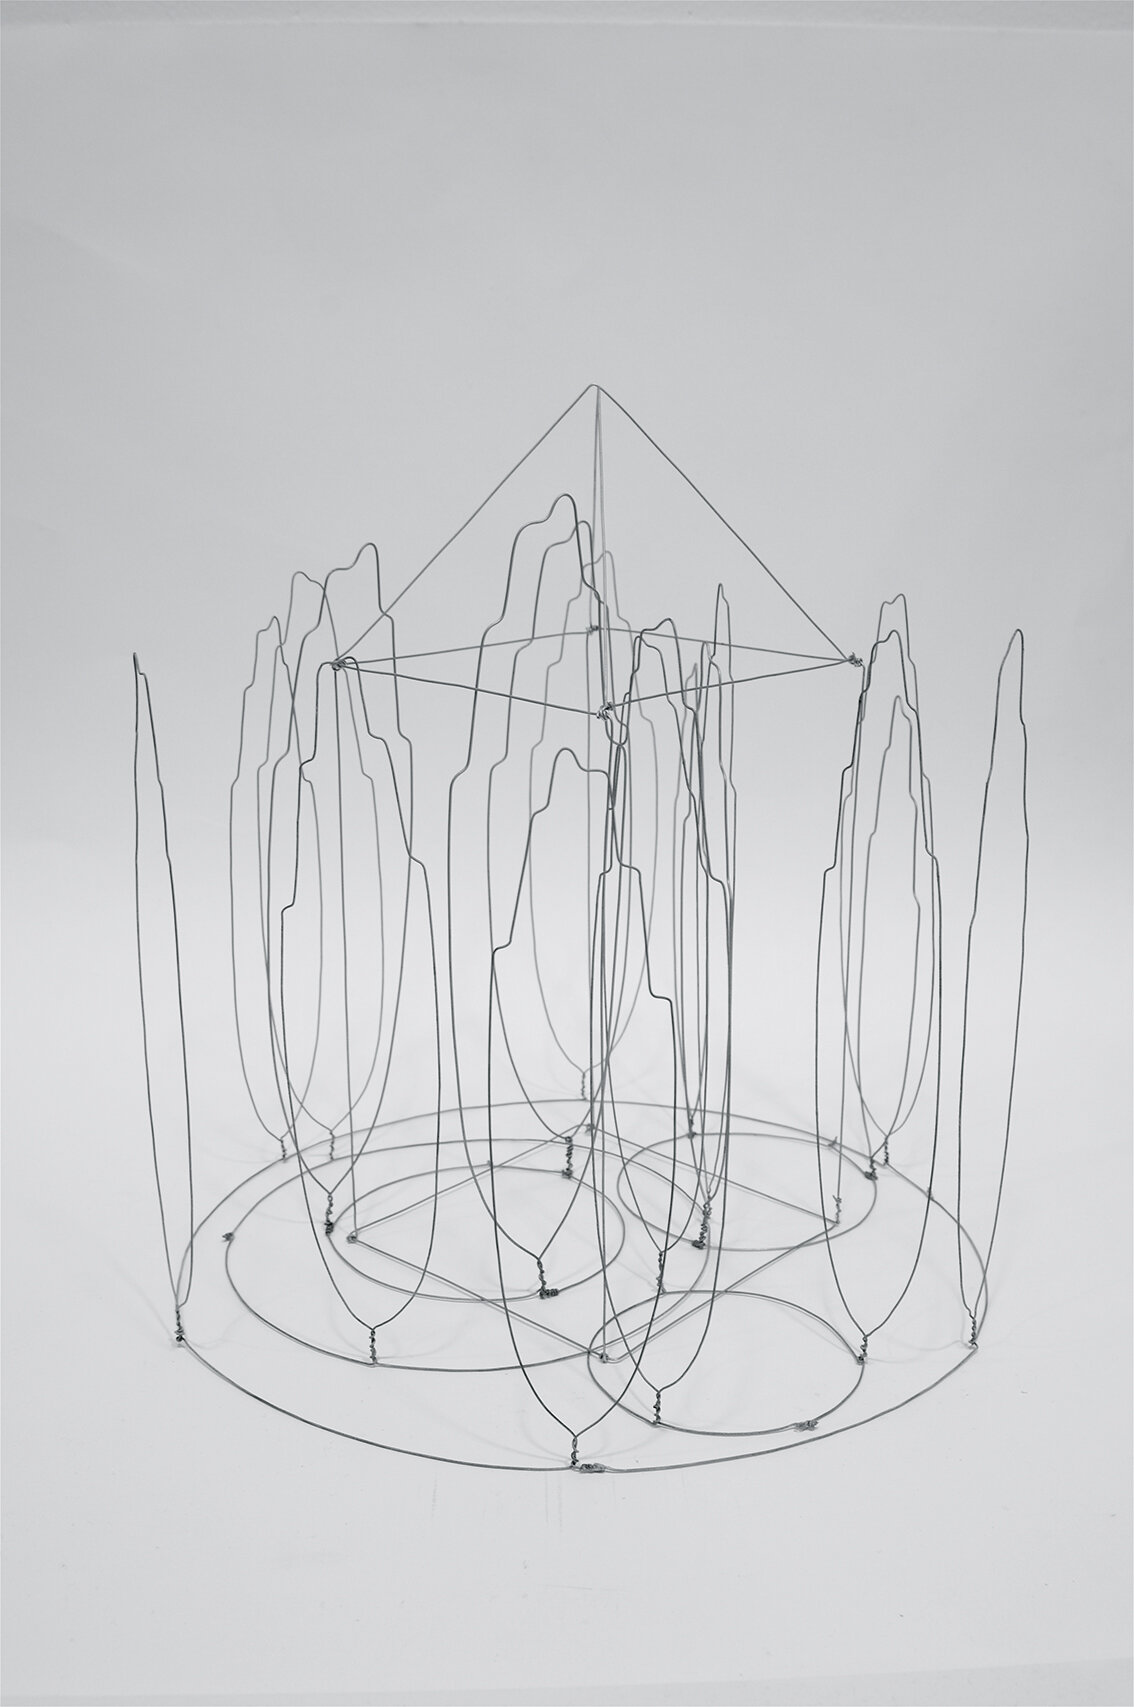  Tholos 2, 1998, Wire. 